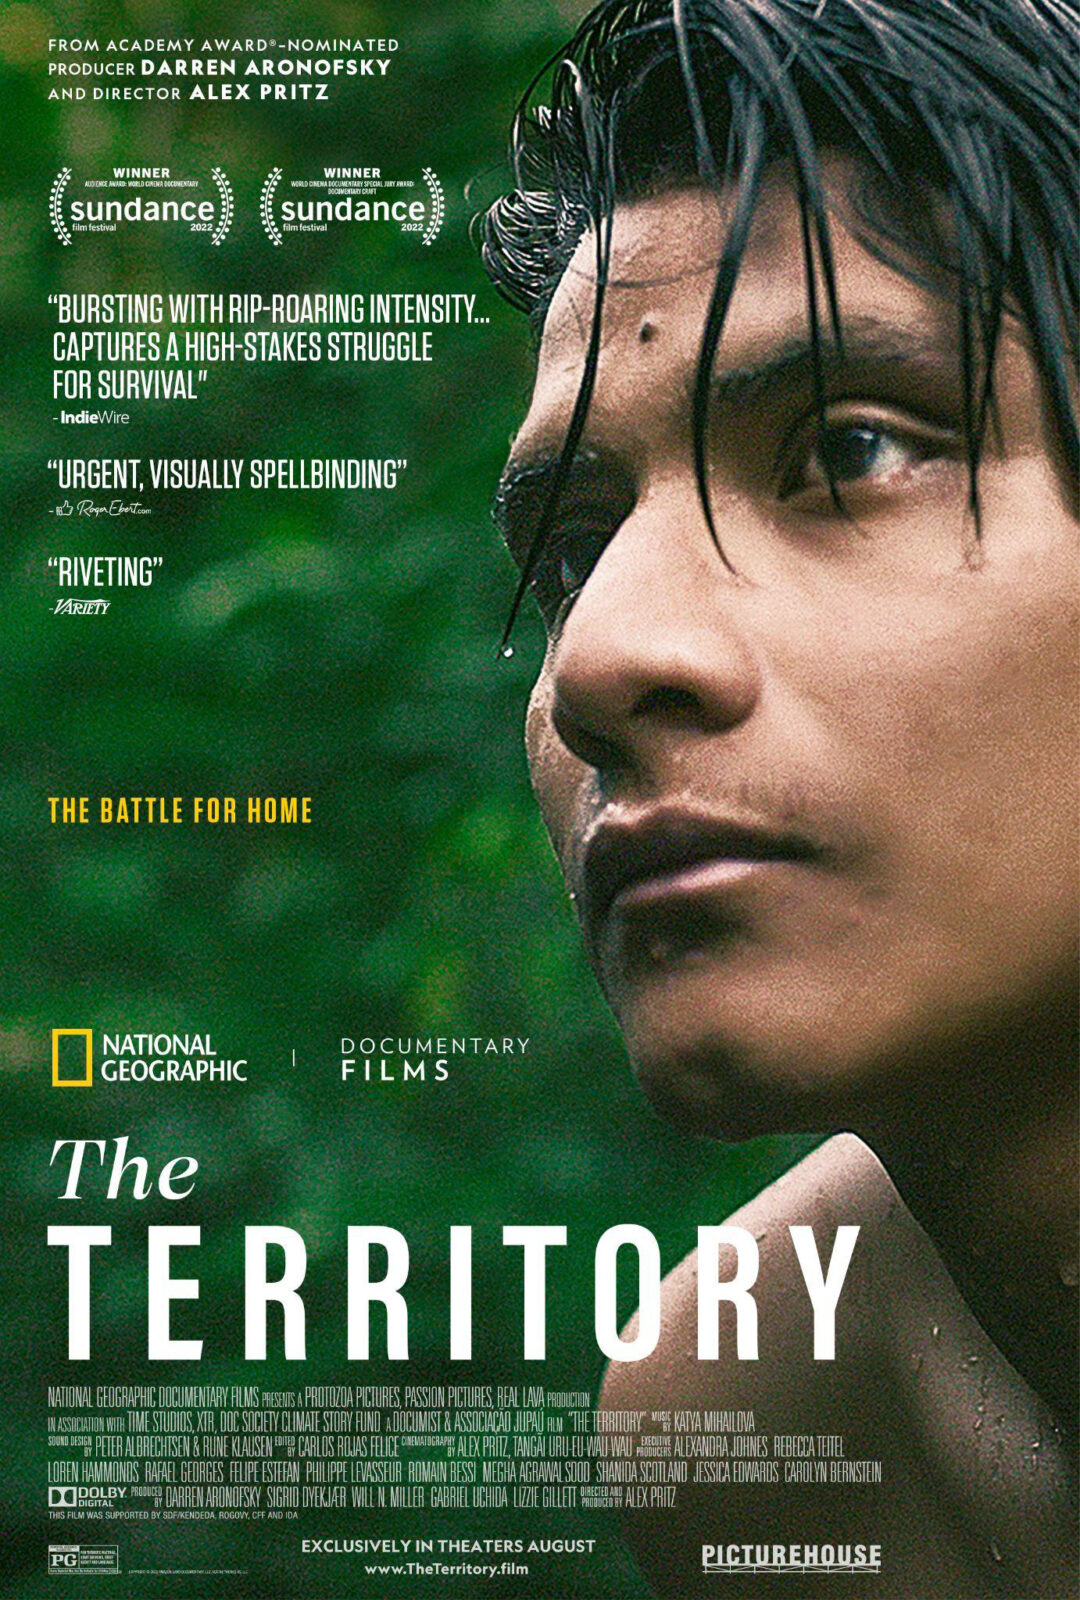 Poster for "the territory"_young indigenous man, forest in the background